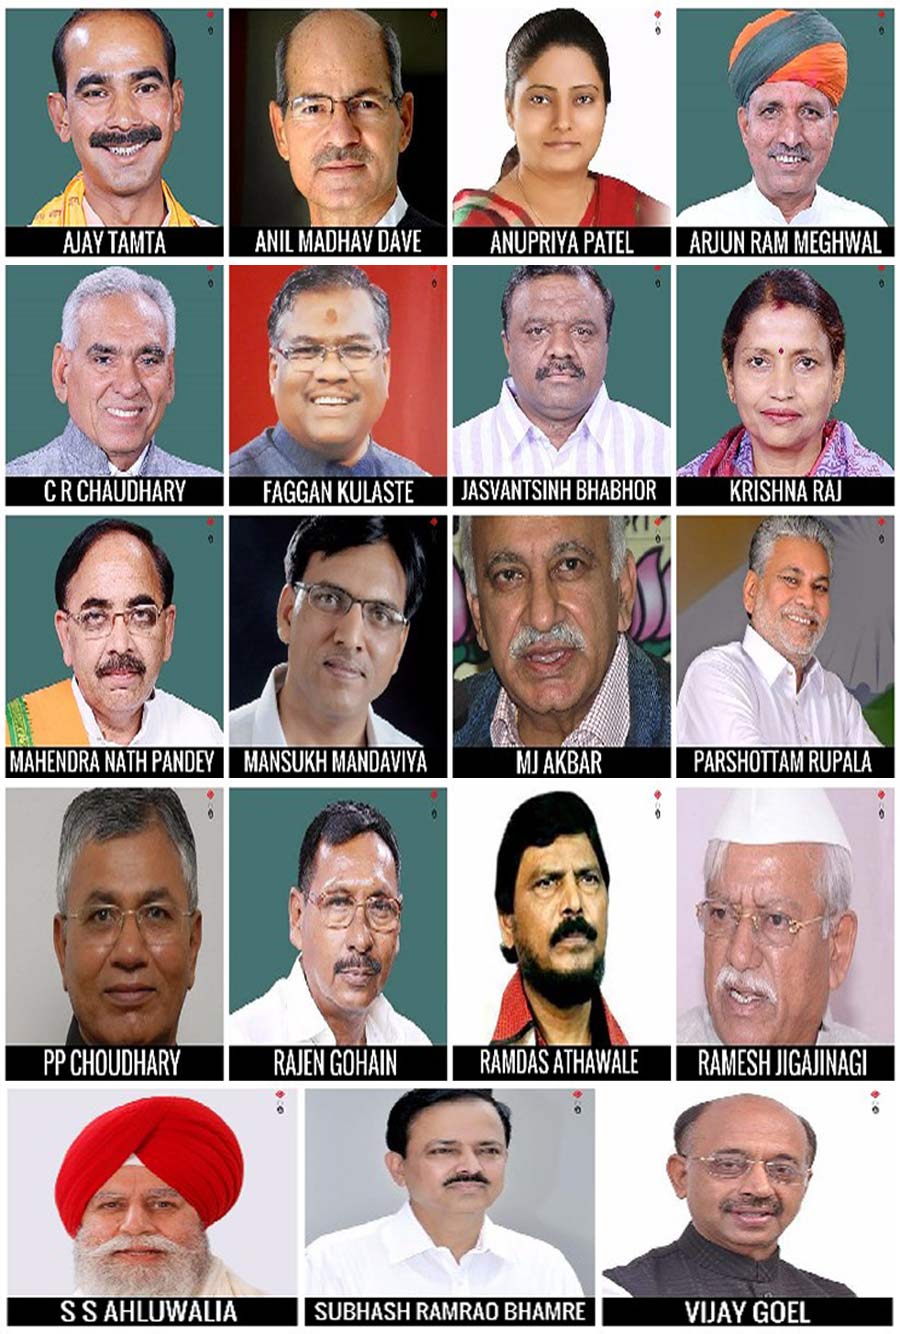 All New Cabinet Ministers Of India Cabinet Image Idea